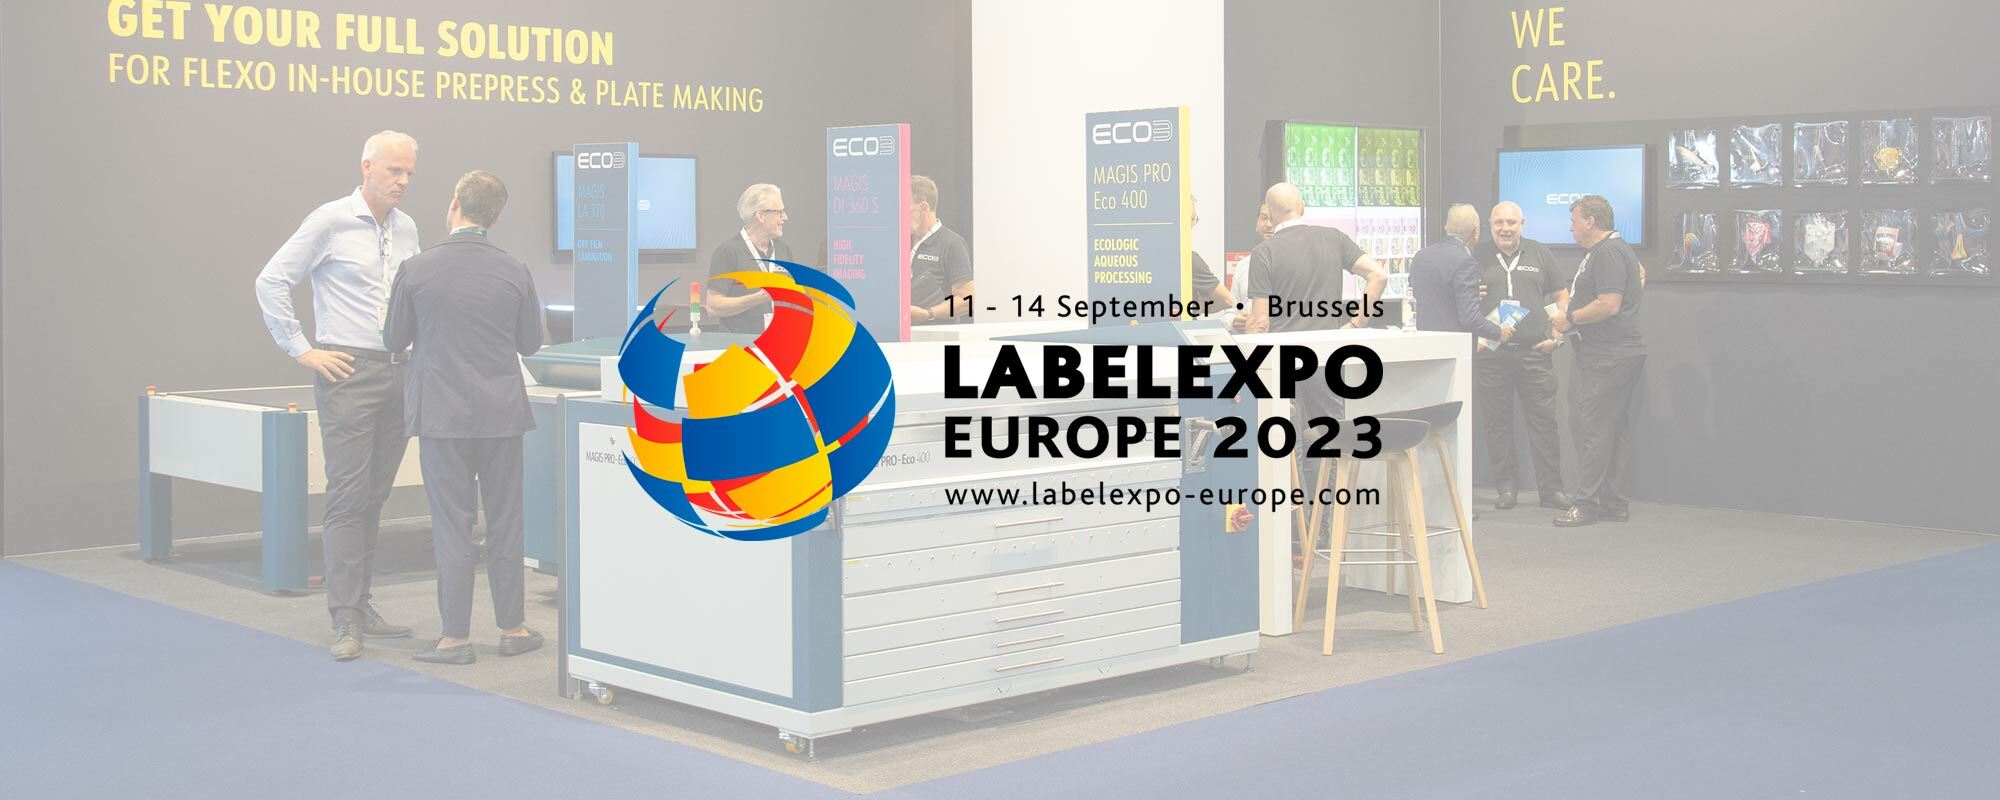 Labelexpo wrapup 00 banner